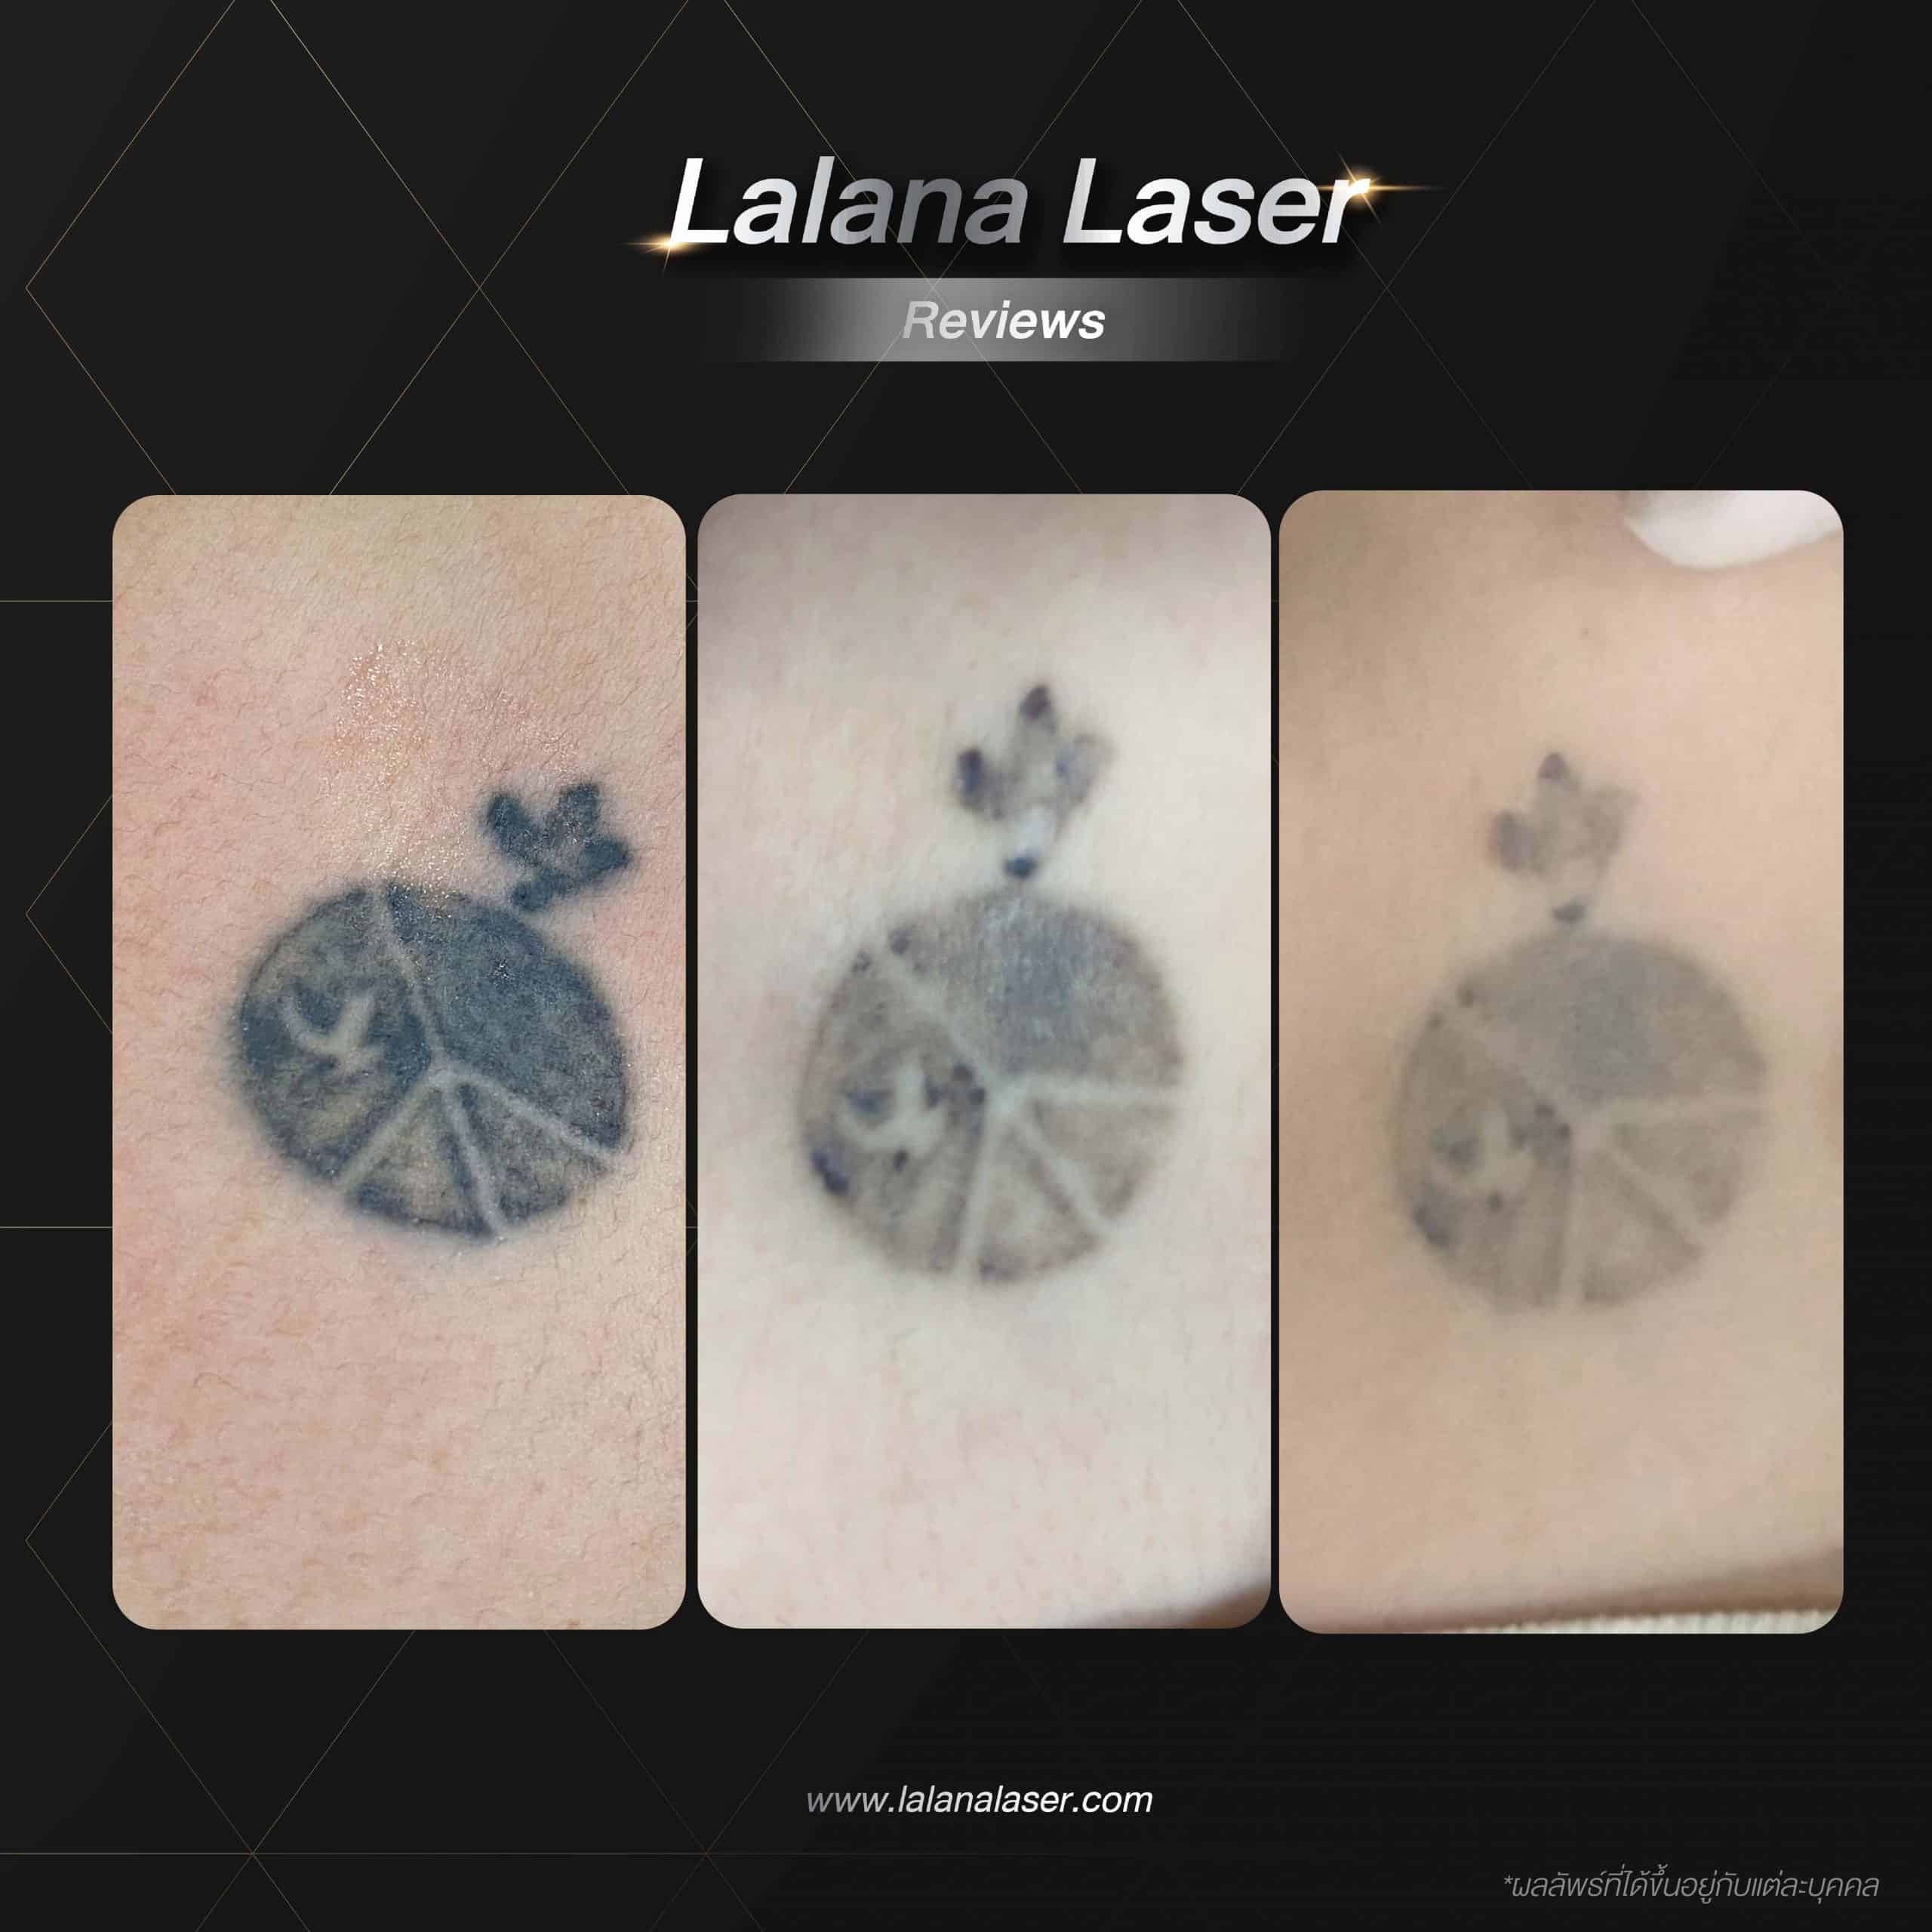 lalana-laser-reviews-free-case-2-scaled